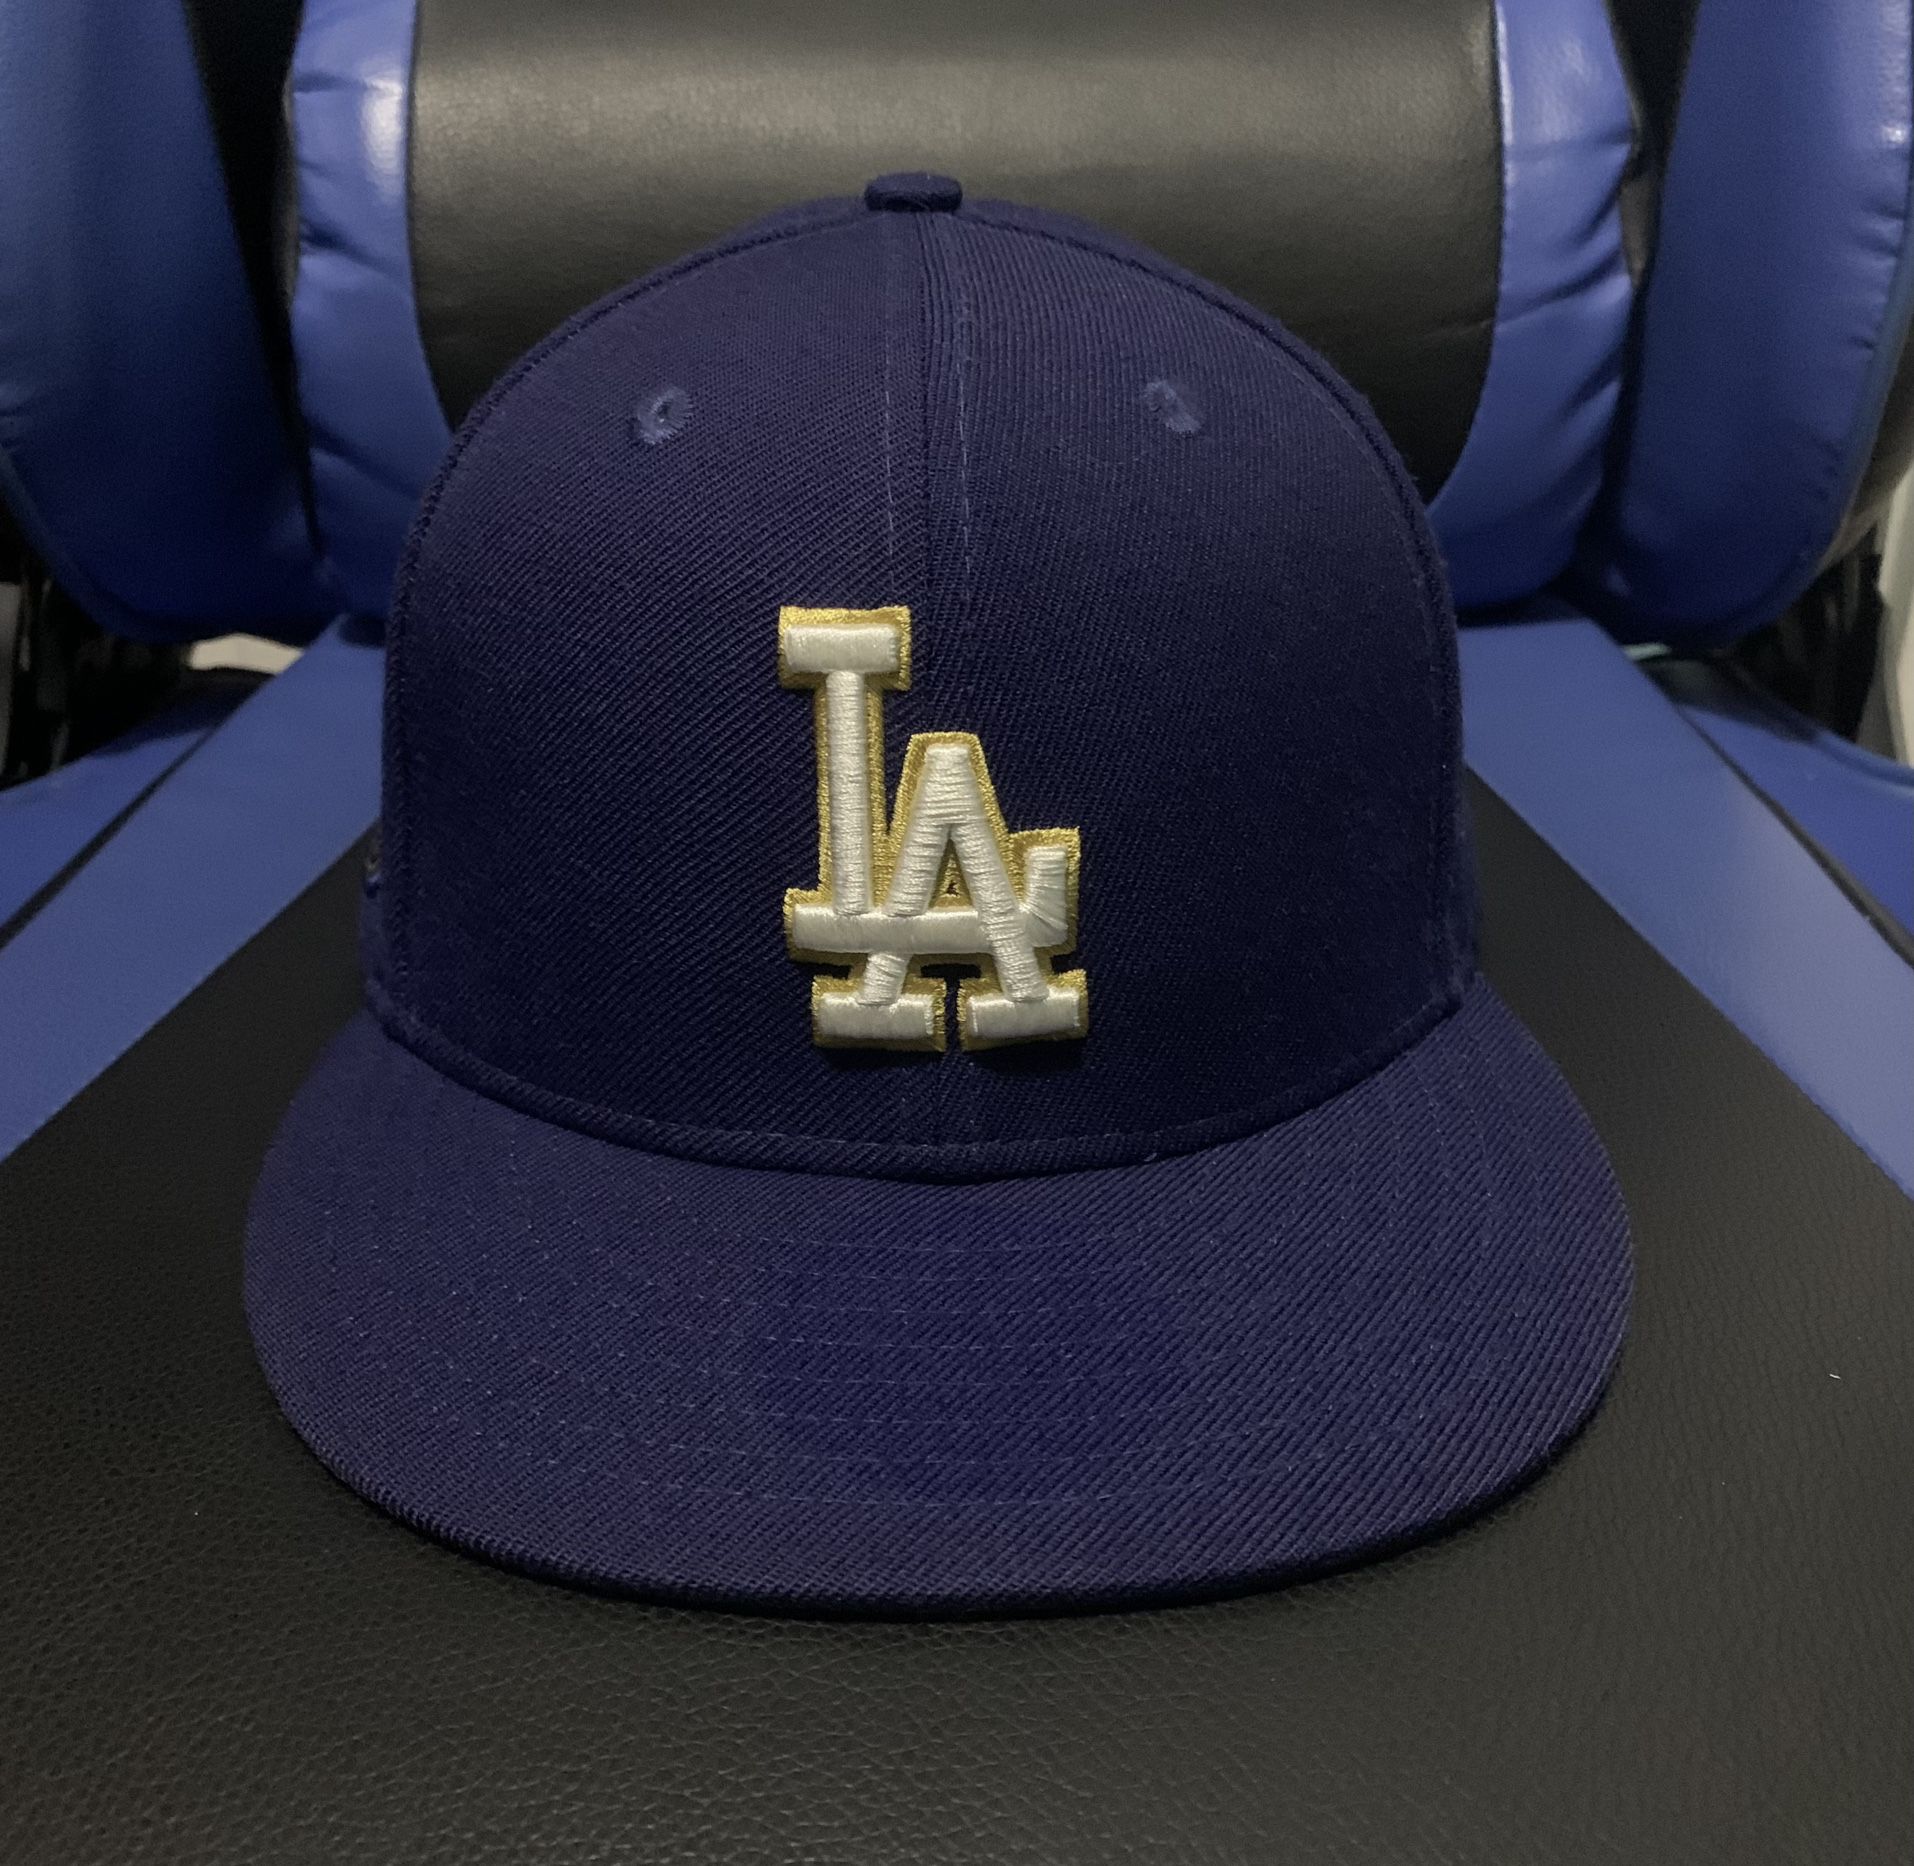 Vintage New Era Los Angeles Dodgers Fitted Hat 6x Champions Size 7 